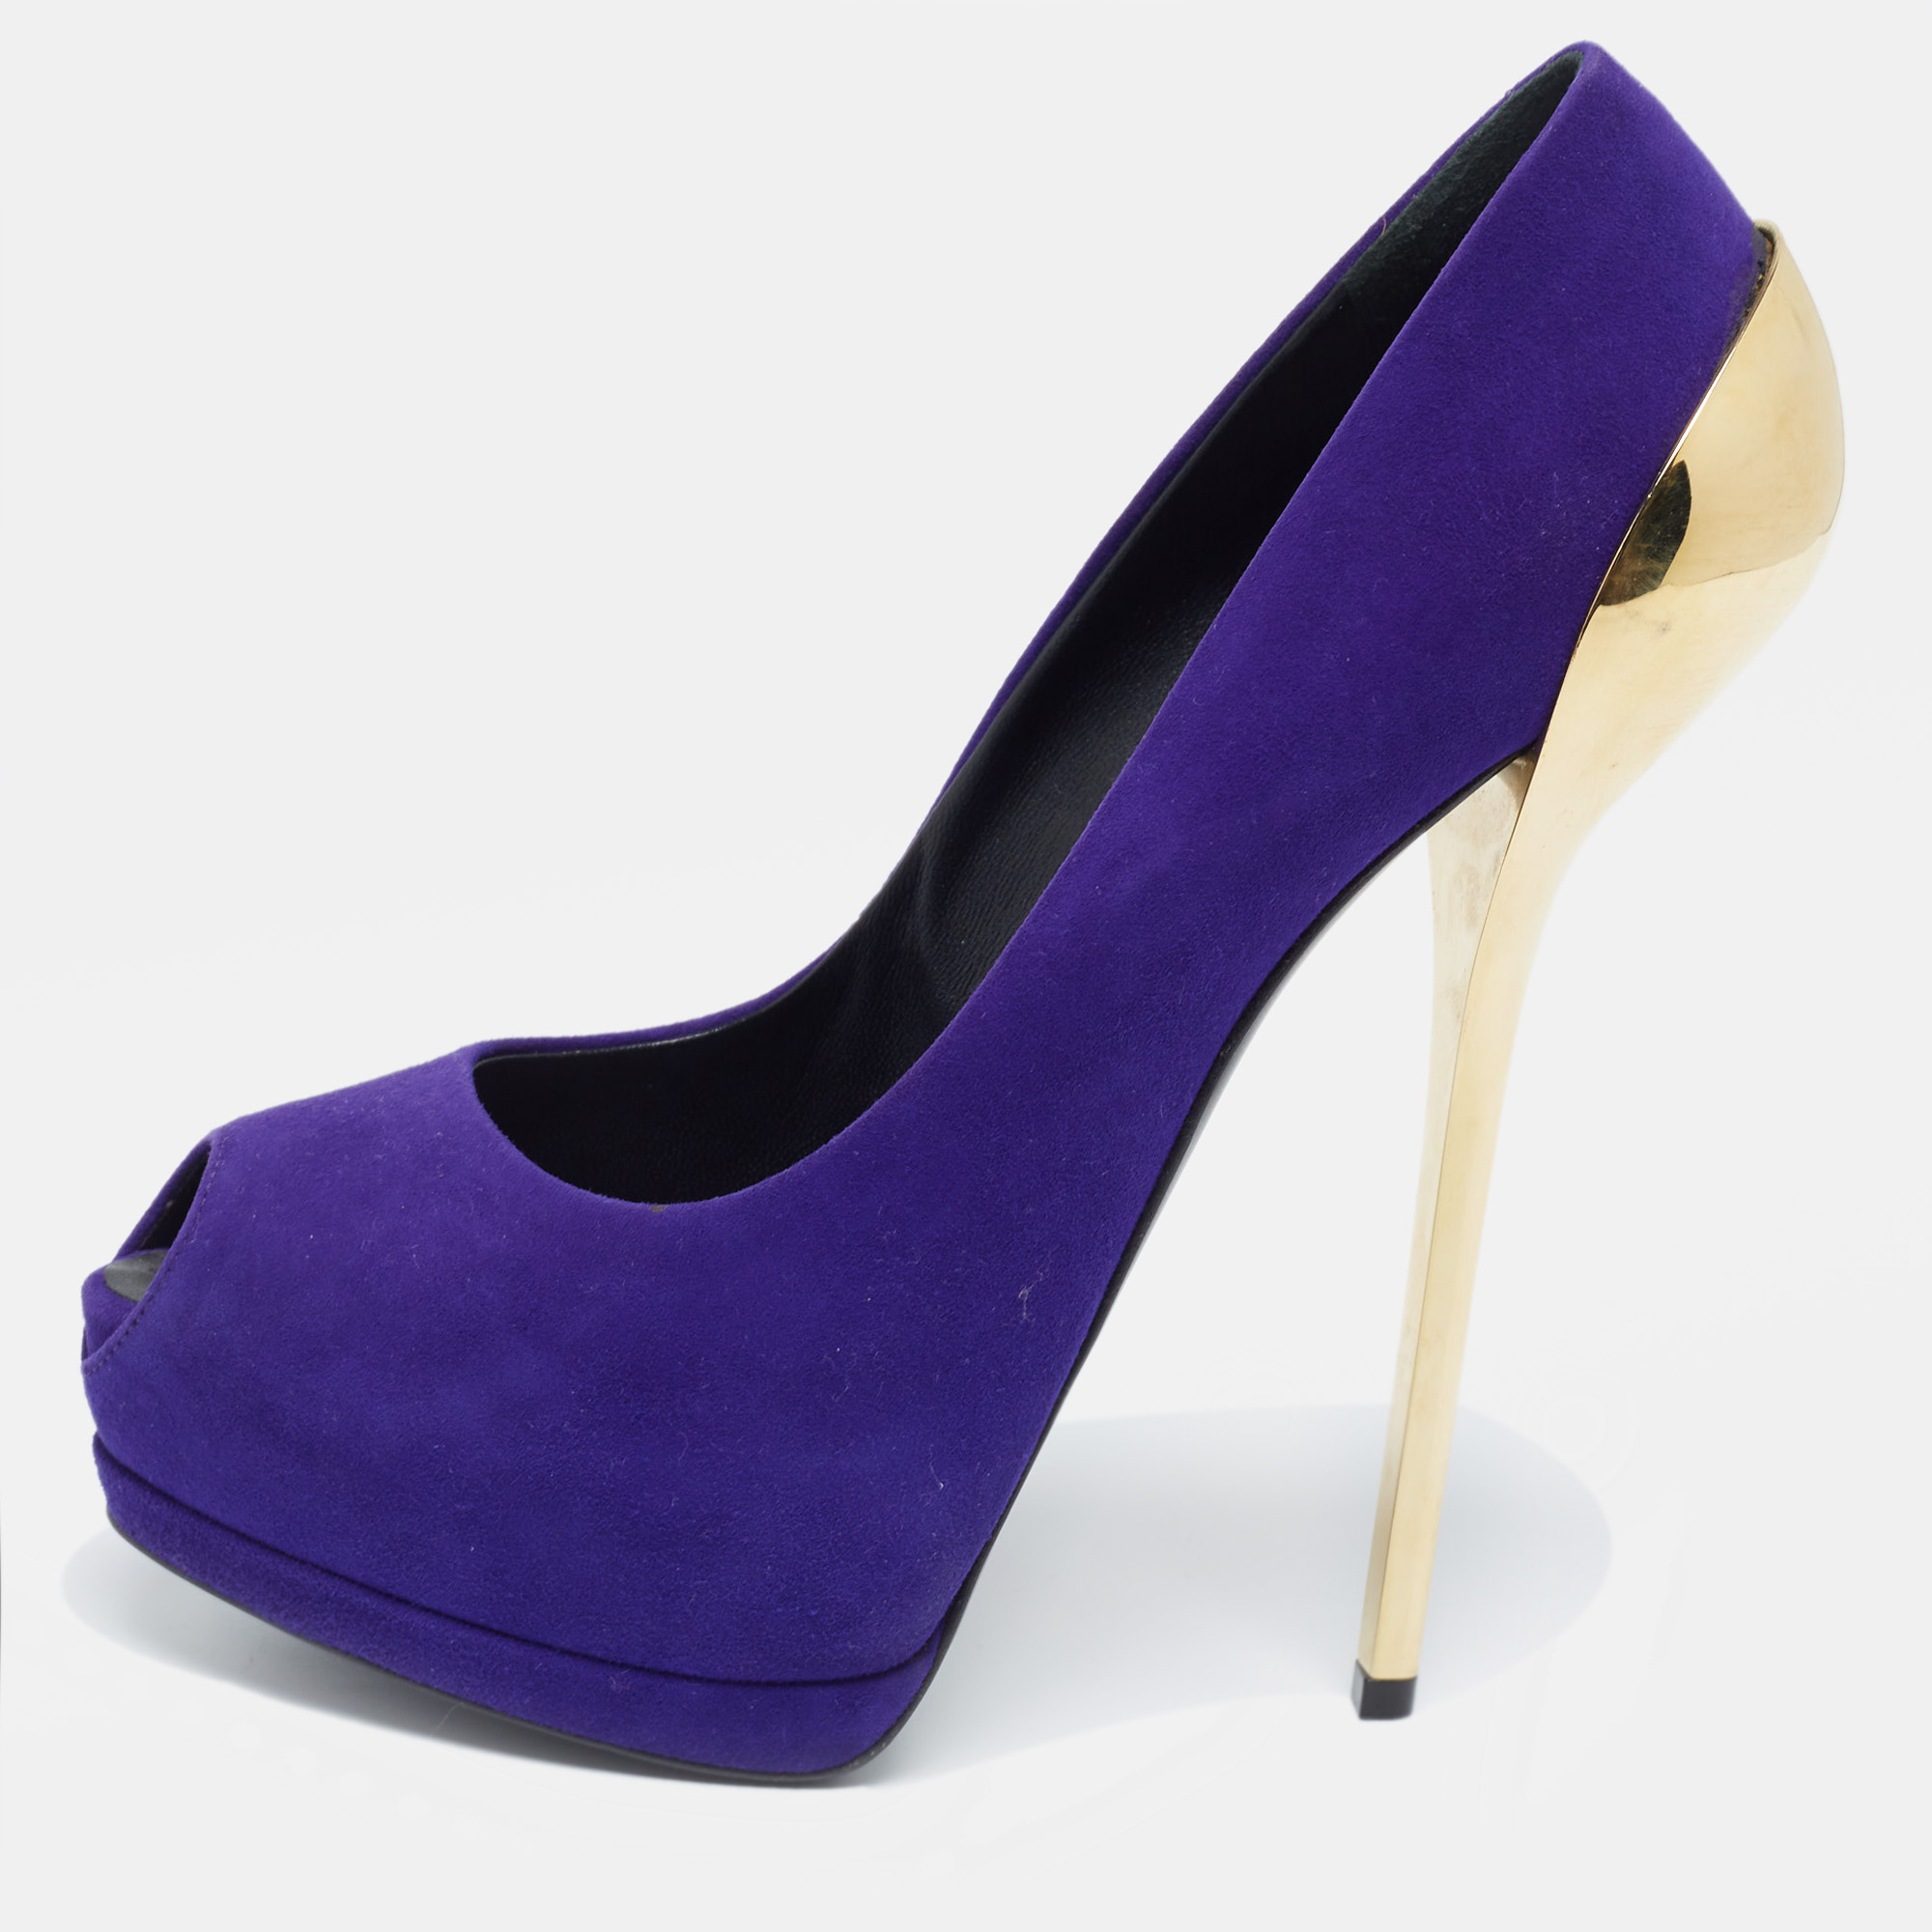 Giuseppe Zanotti yet again brings a stunning set of pumps that makes us marvel at its beauty and craftsmanship. Crafted from purple suede these pumps are designed with tall metal heels and peep toes.